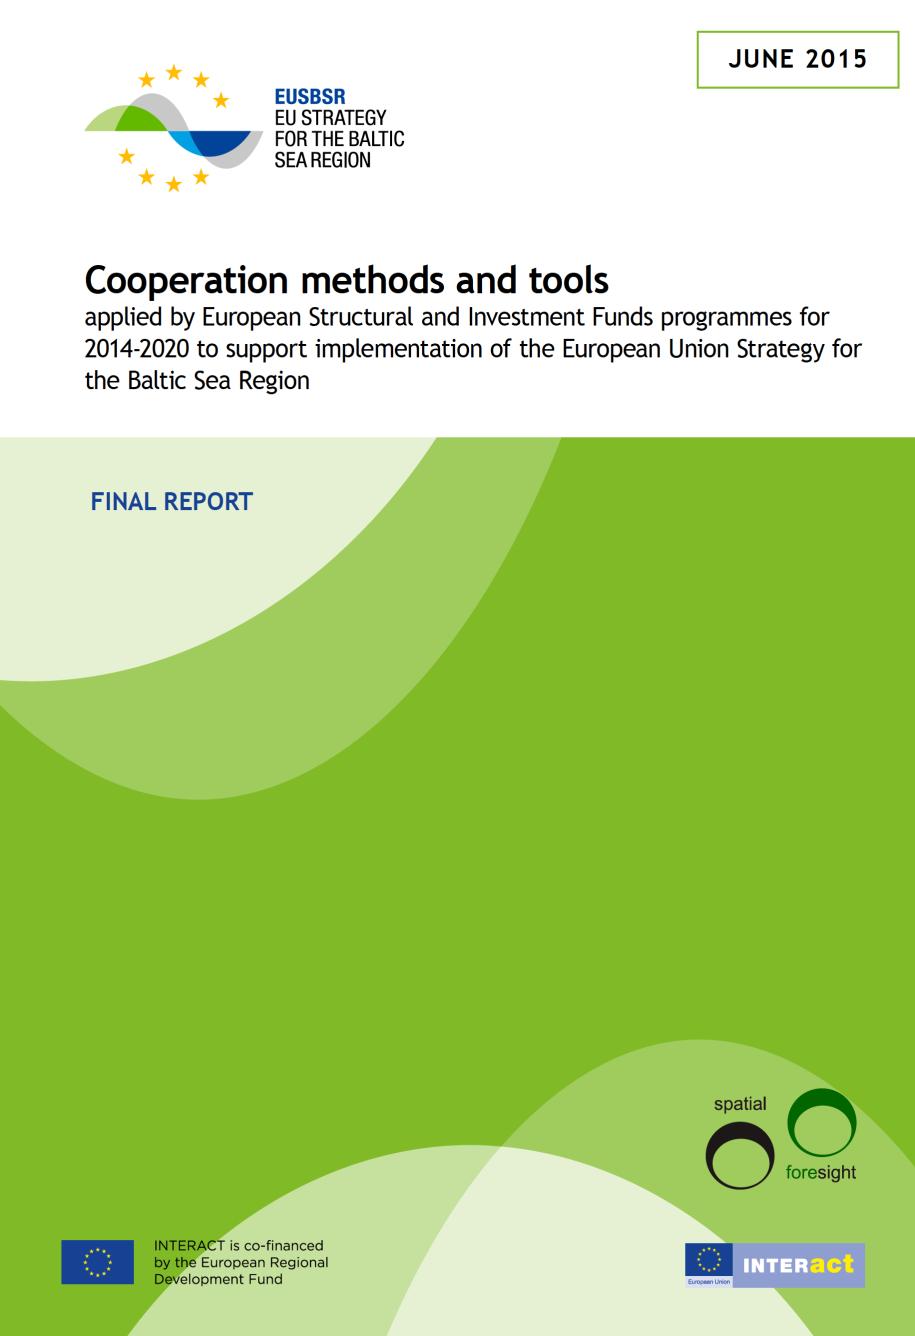 Study on cooperation methods for the EUSBSR The study was aiming at analysing methods and tools foreseen for cooperation within pre-selected ESI Funds programmes to support implementation of the